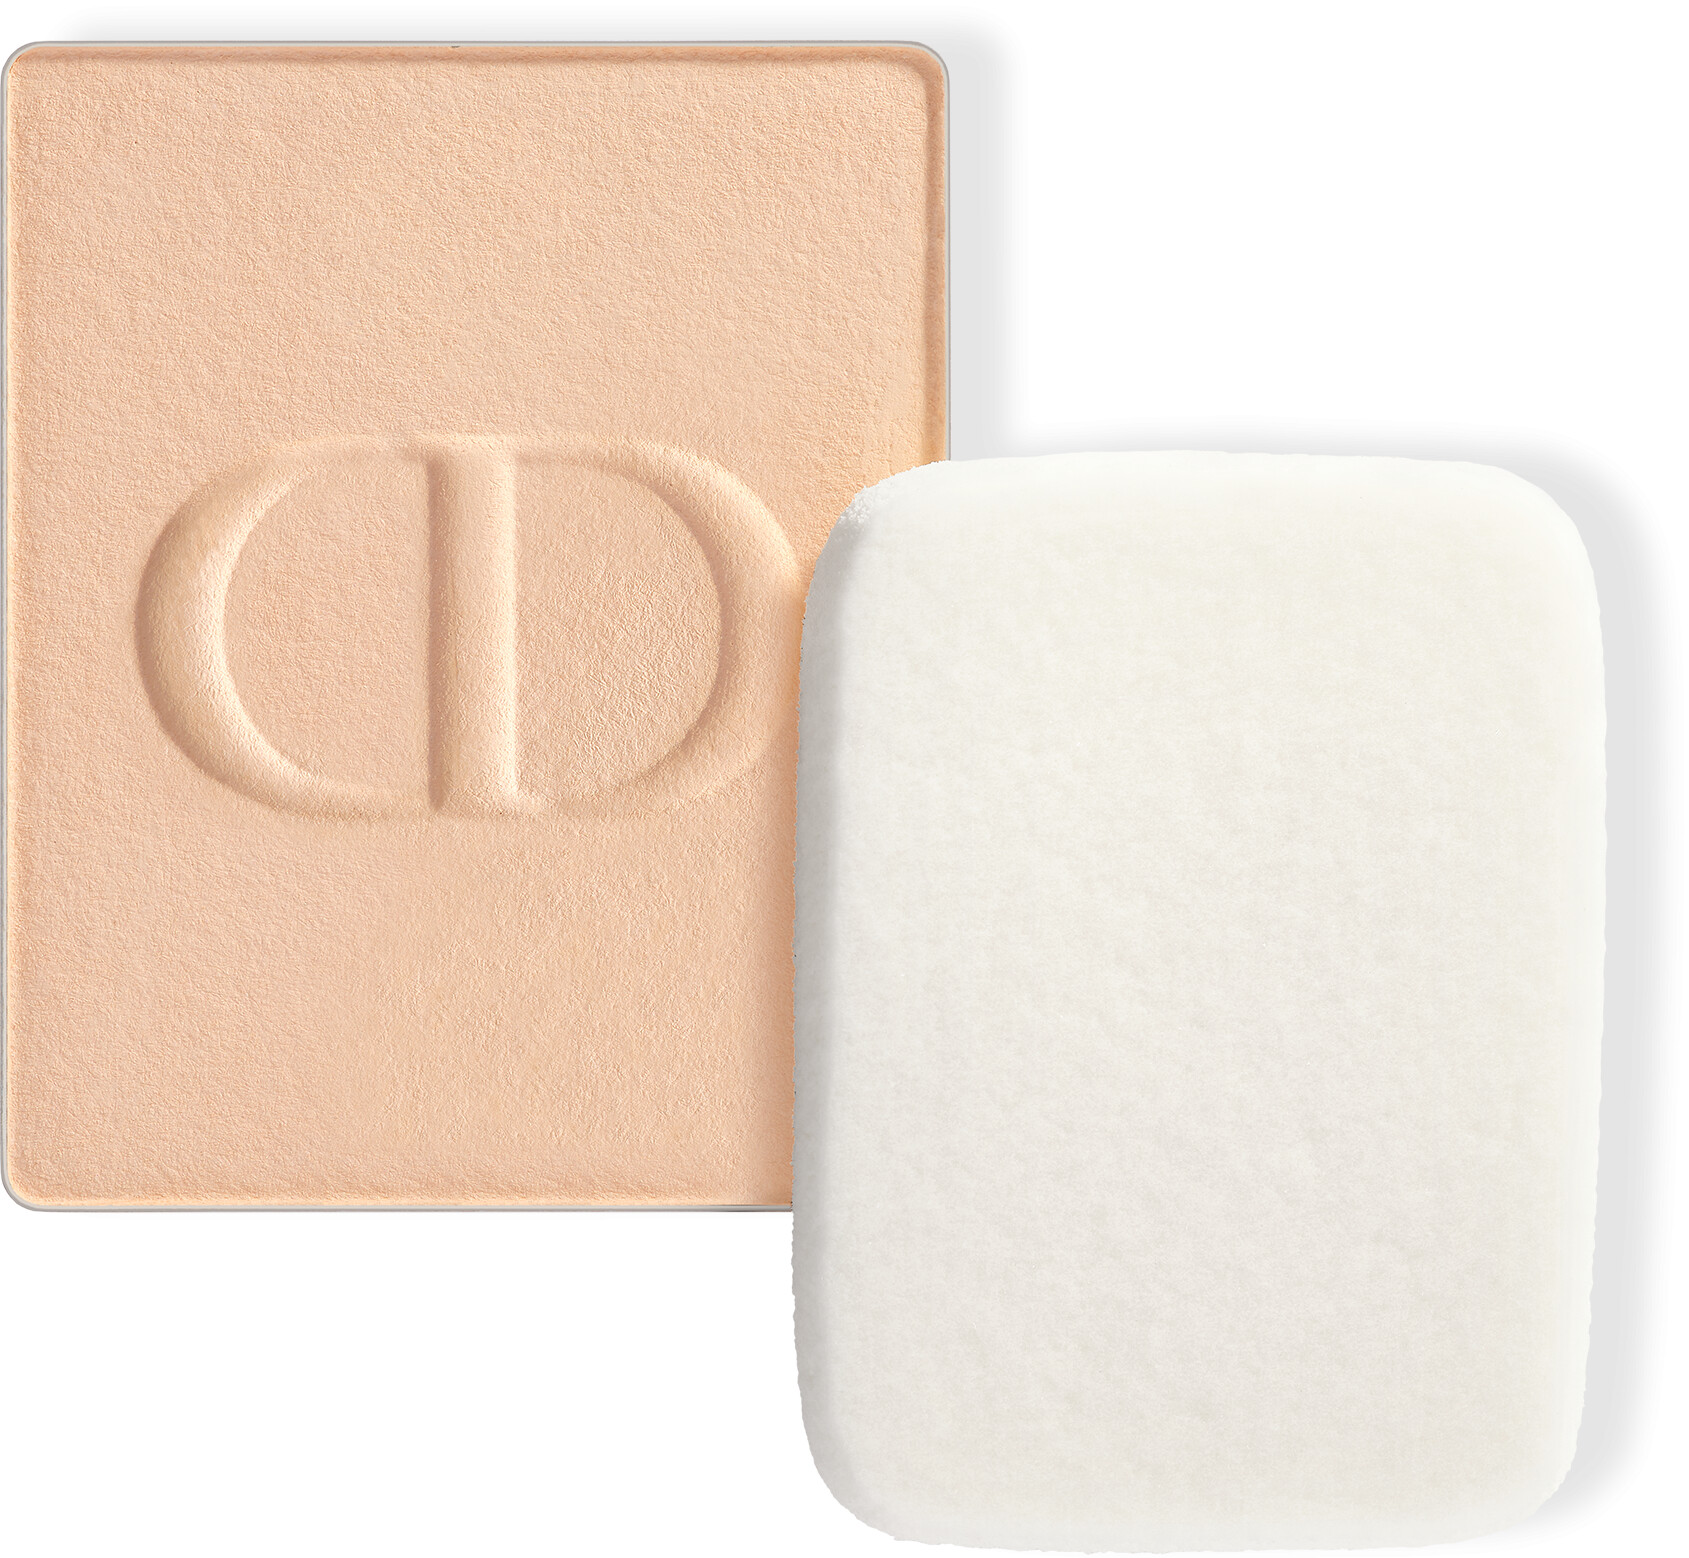 DIOR Dior Forever Compact Foundation Refill 10g 3N